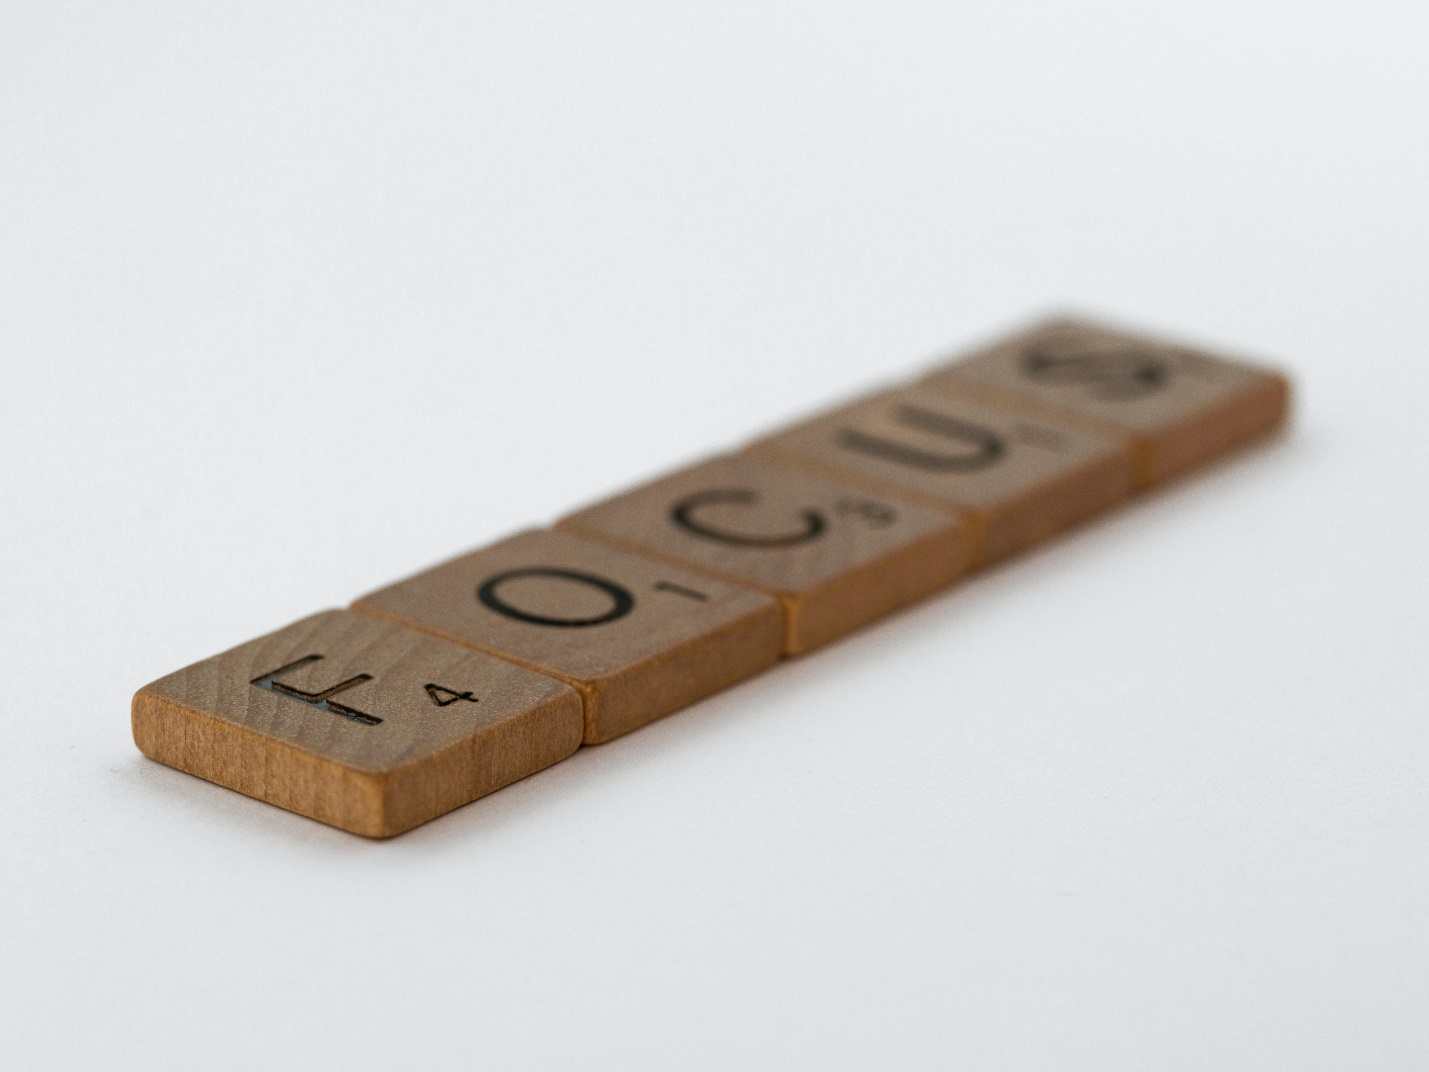 Focus Spelled Out by Scrabble Pieces